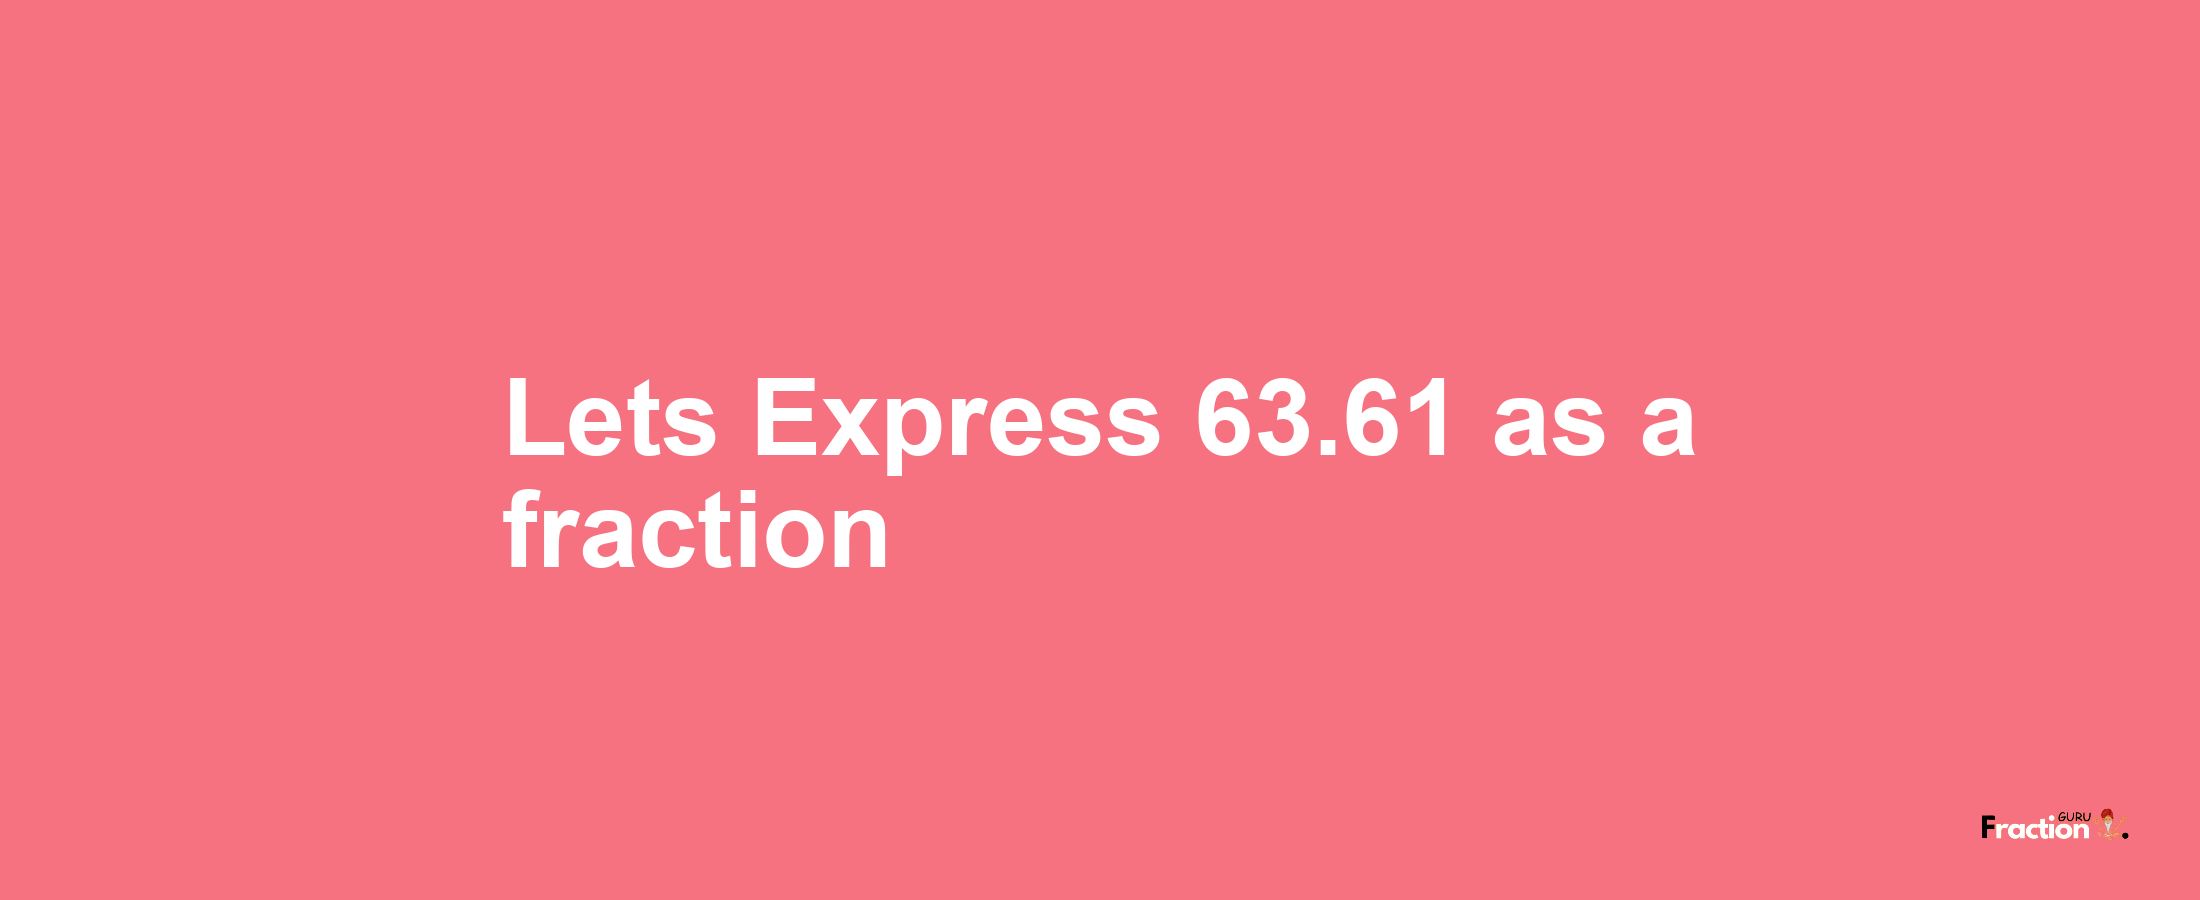 Lets Express 63.61 as afraction